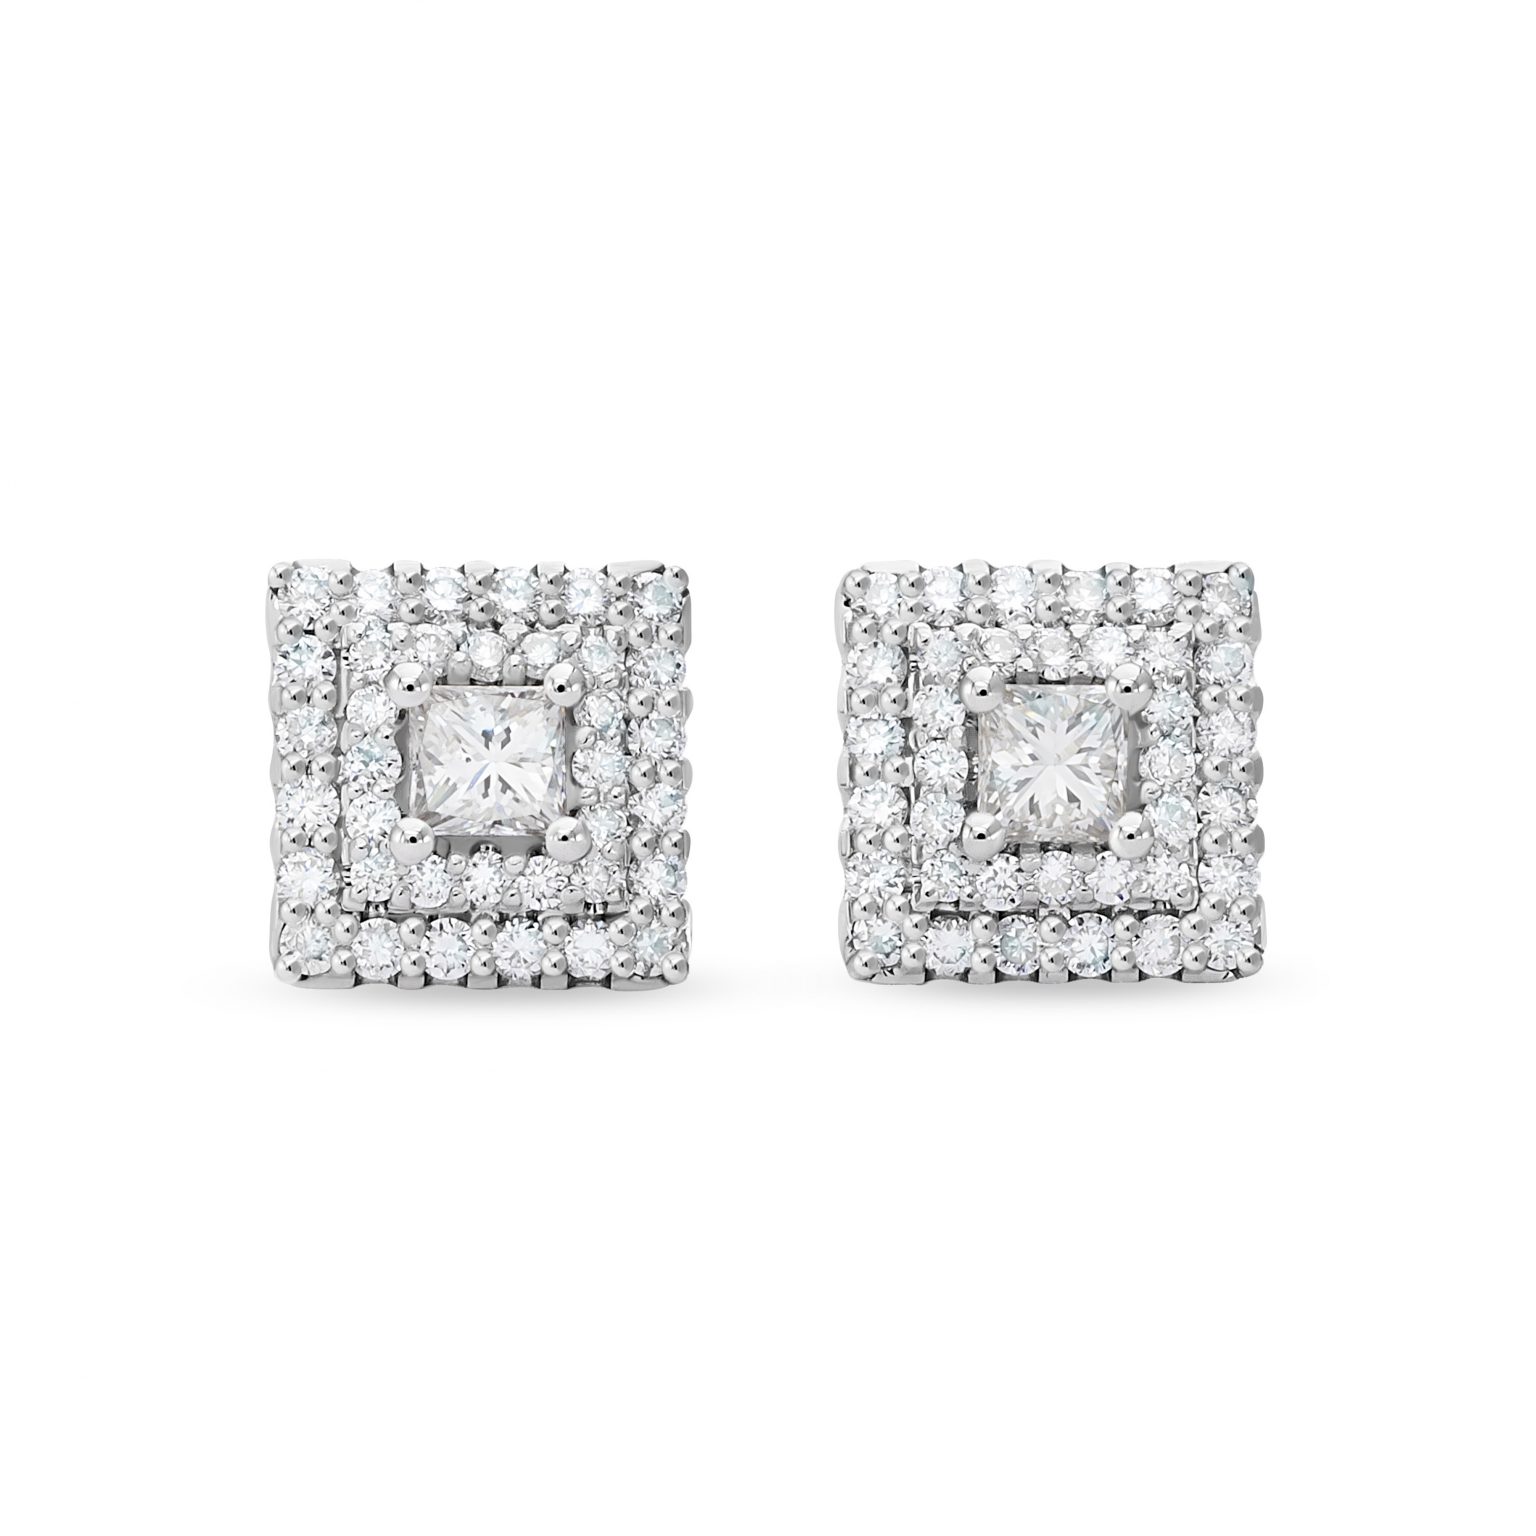 Diamond stud earrings with a total weight of 1.78 ct